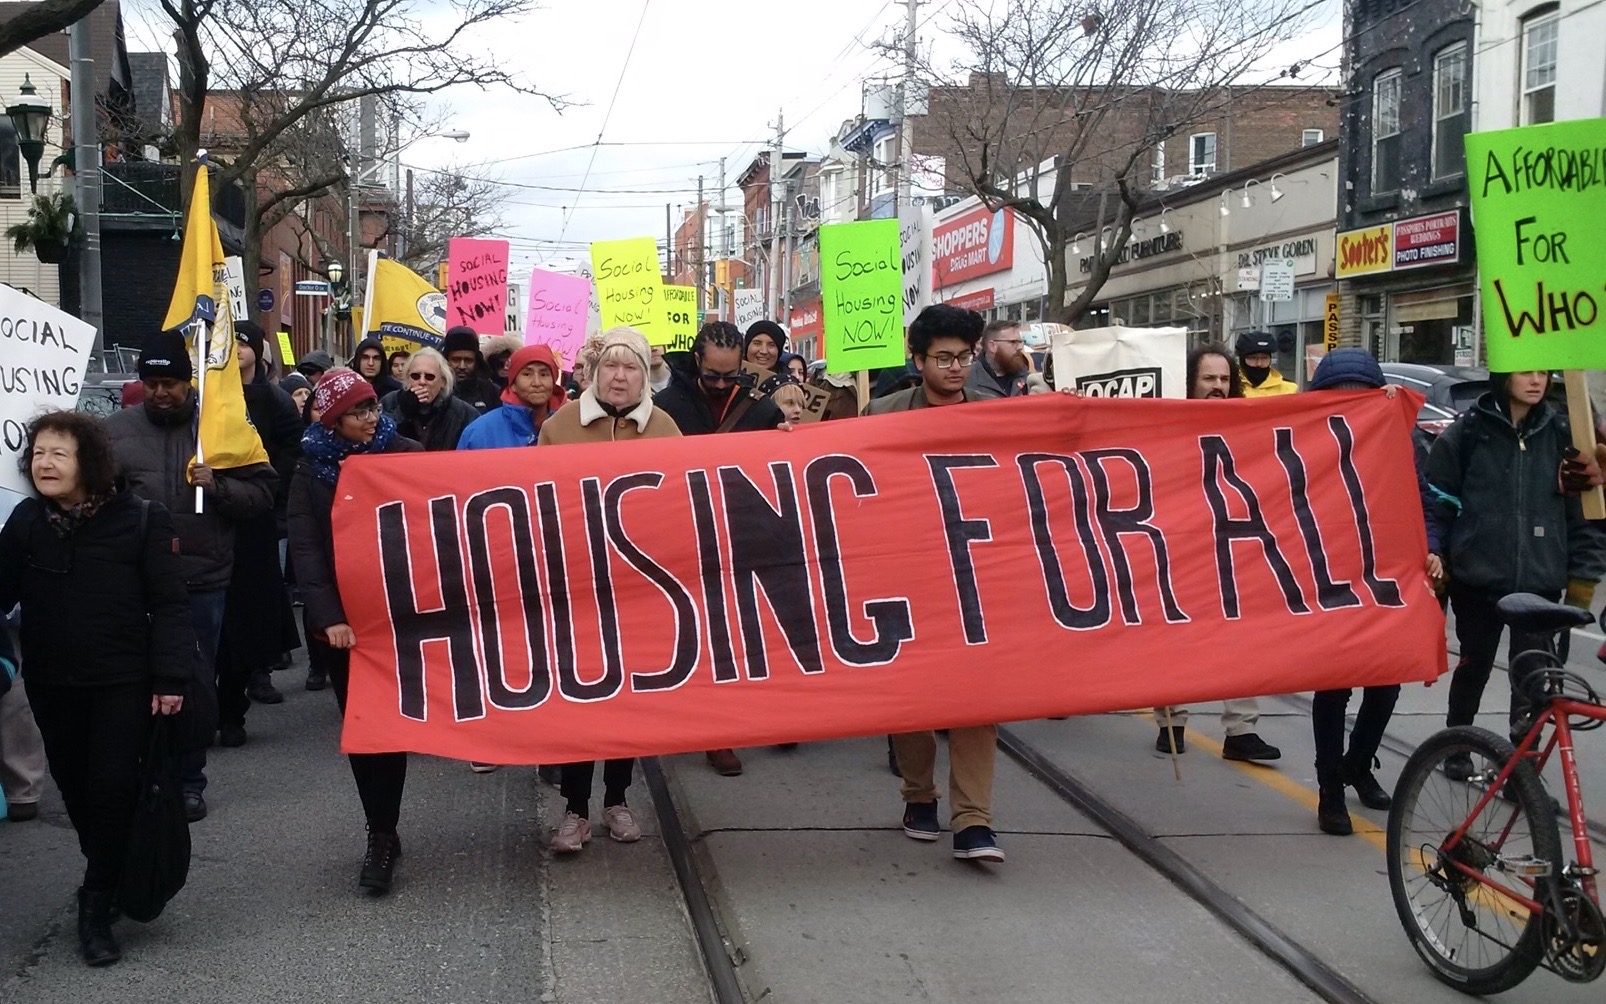 A banner that says "Housing for All" is carried at the beginning of a housing rally in Toronto. Image credit: Cathy Crowe